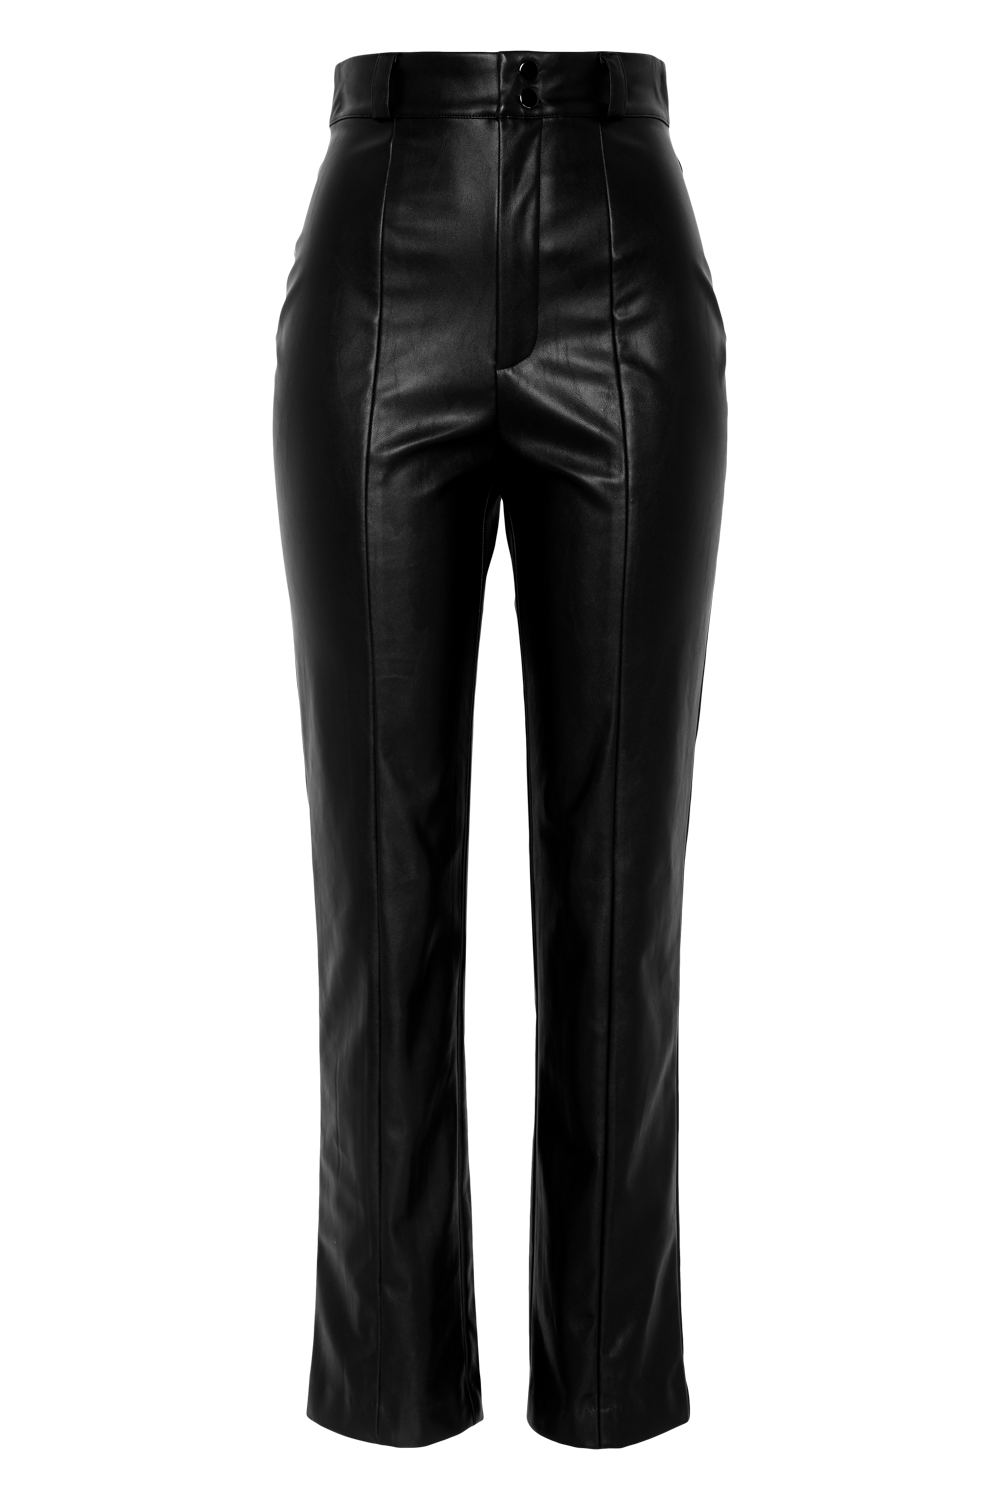 Buy Trendyol Mink Limited Edition Black Carrot Woven Faux Leather Trousers  With Buttons In The Front Online